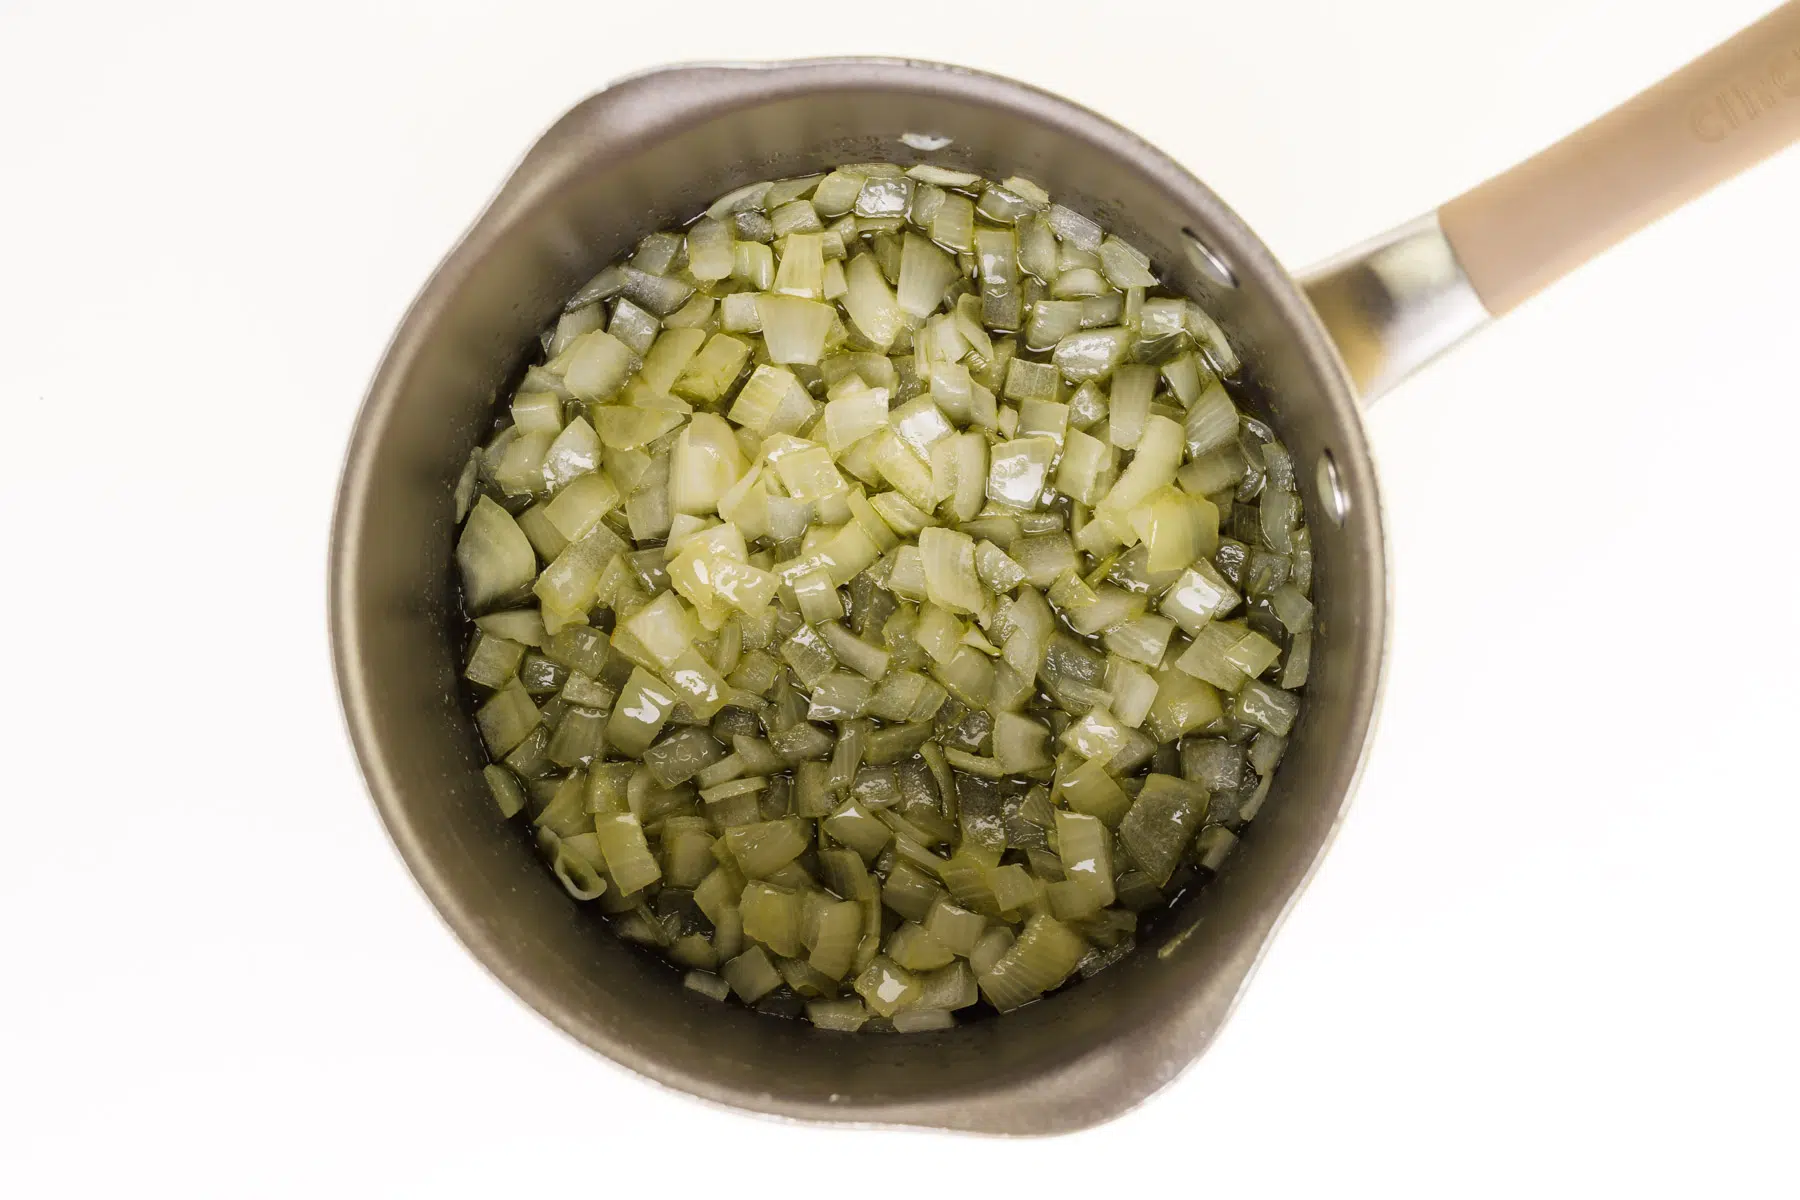 Chopped onions are cooking in the bottom of a saucepan.